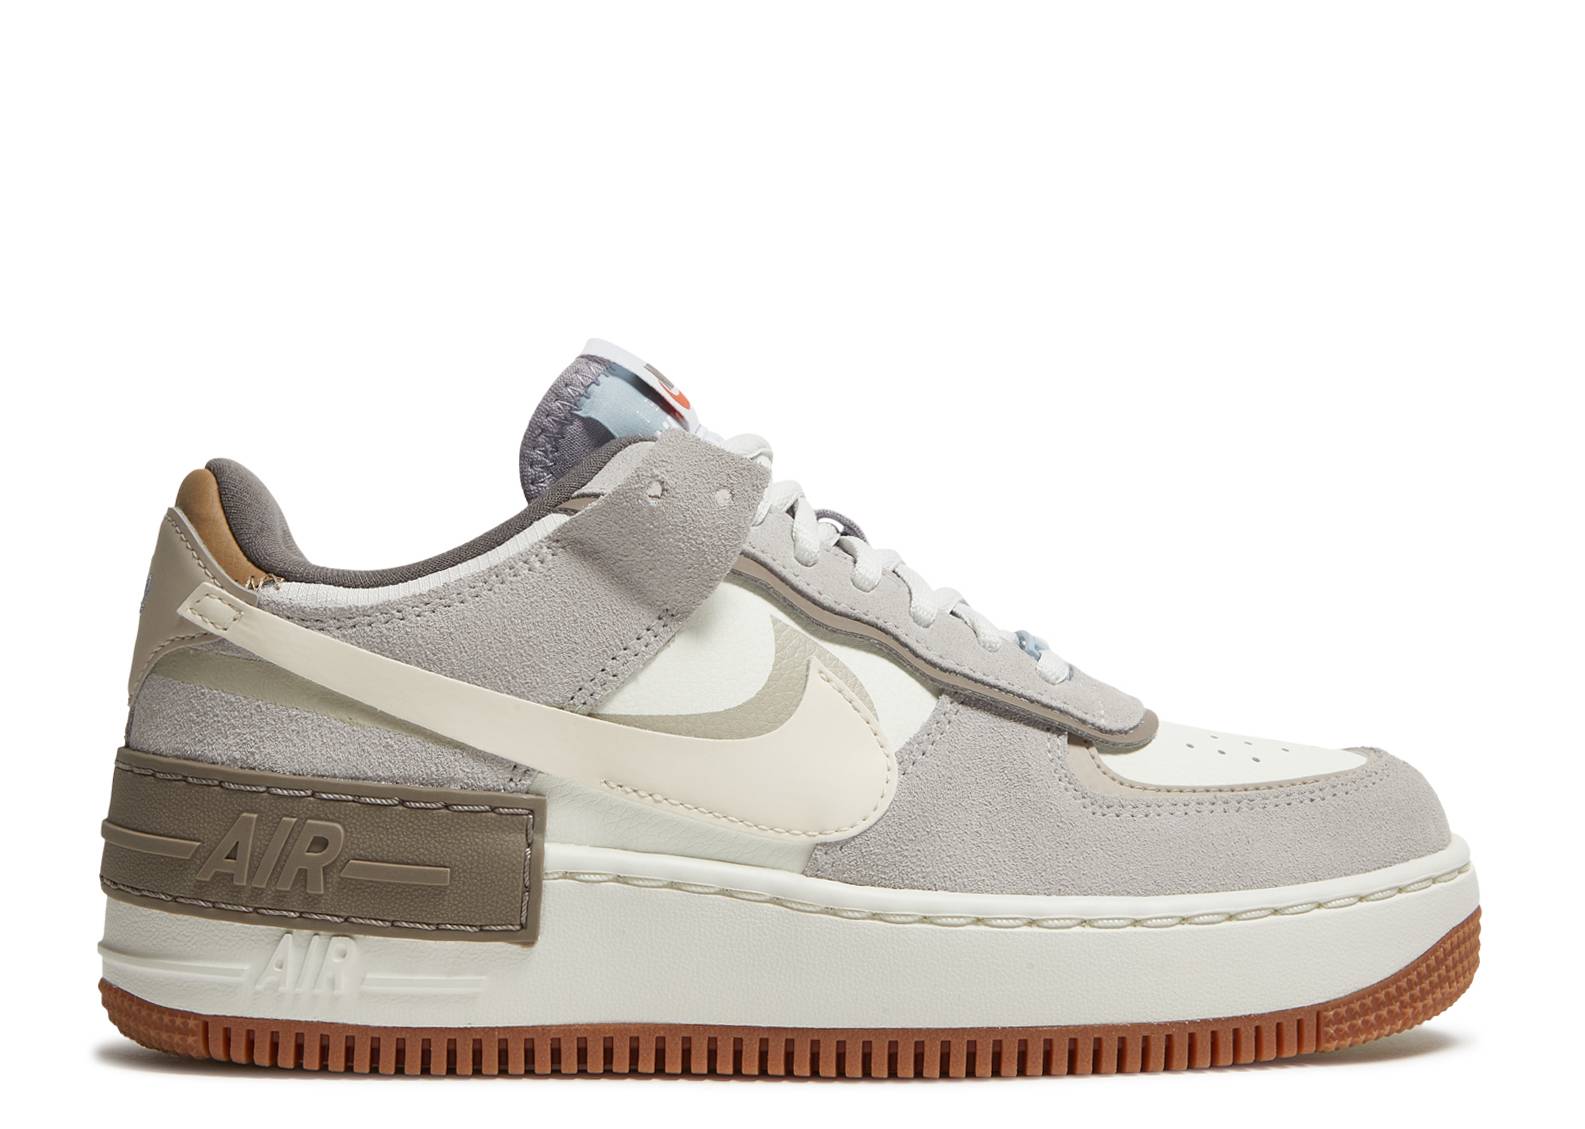 Wmns Air Force 1 Shadow 'Sail Pale Ivory'